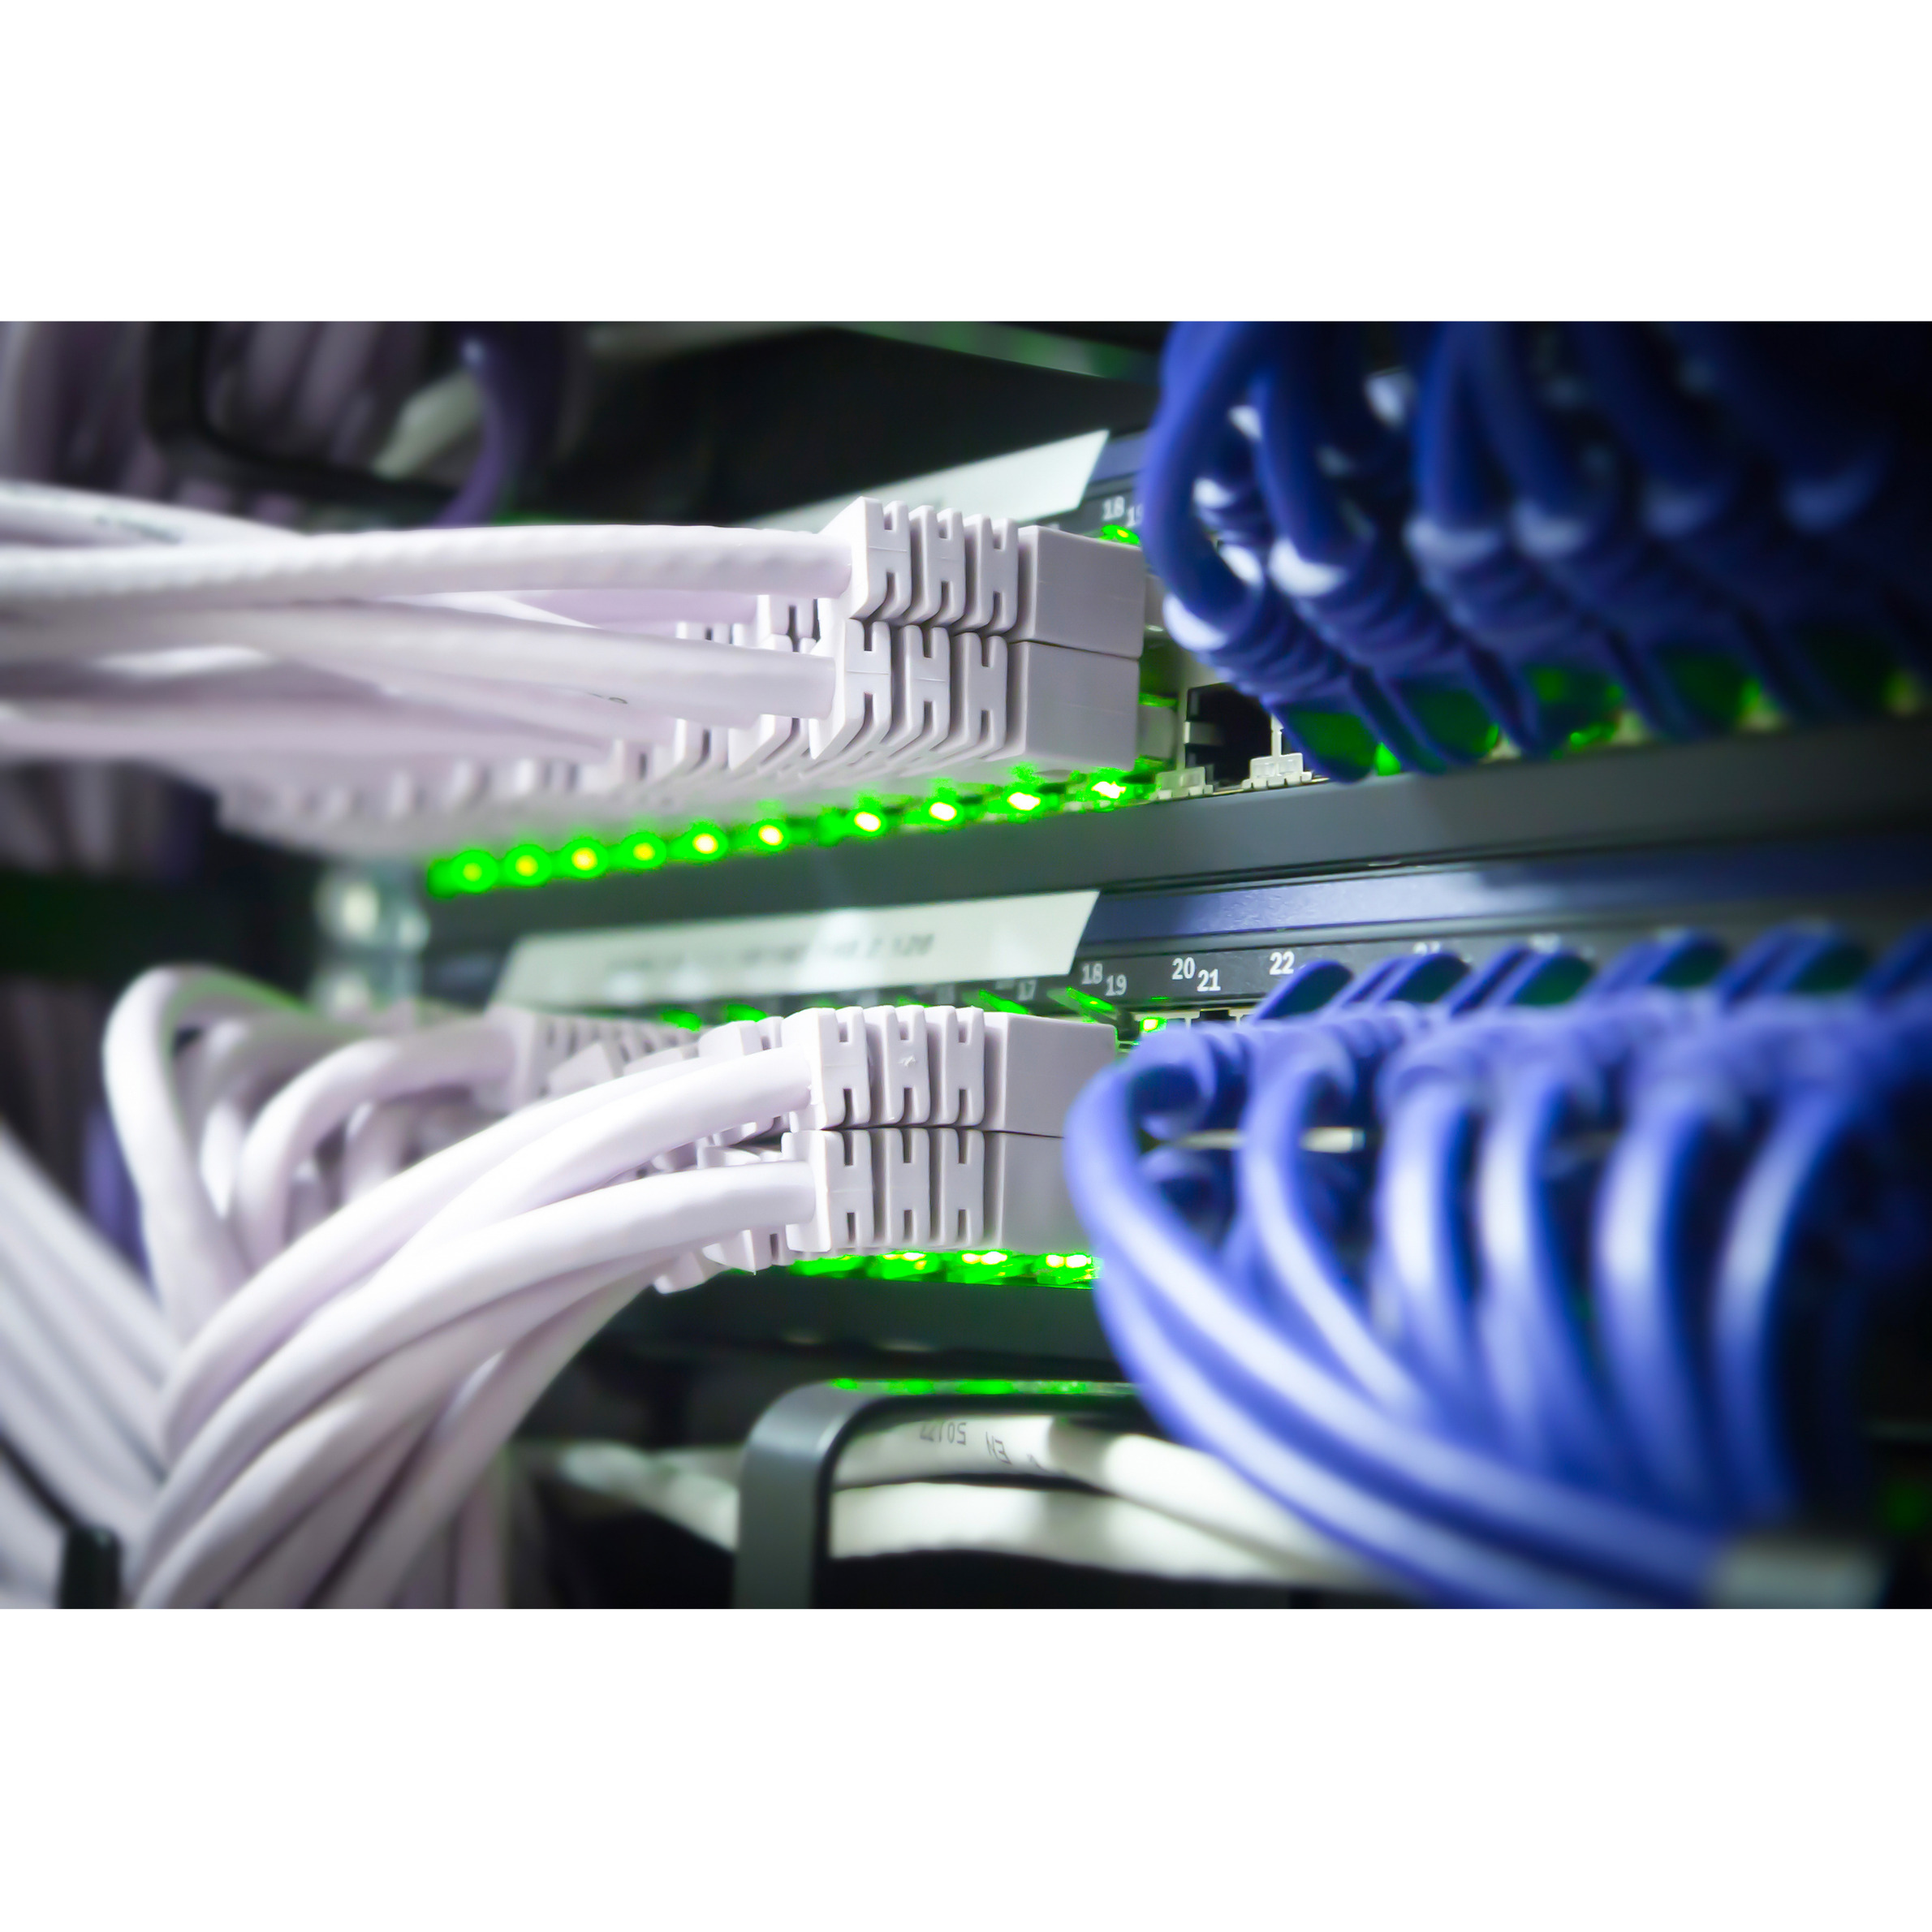 What are the benefits of Structured Cabling Systems?